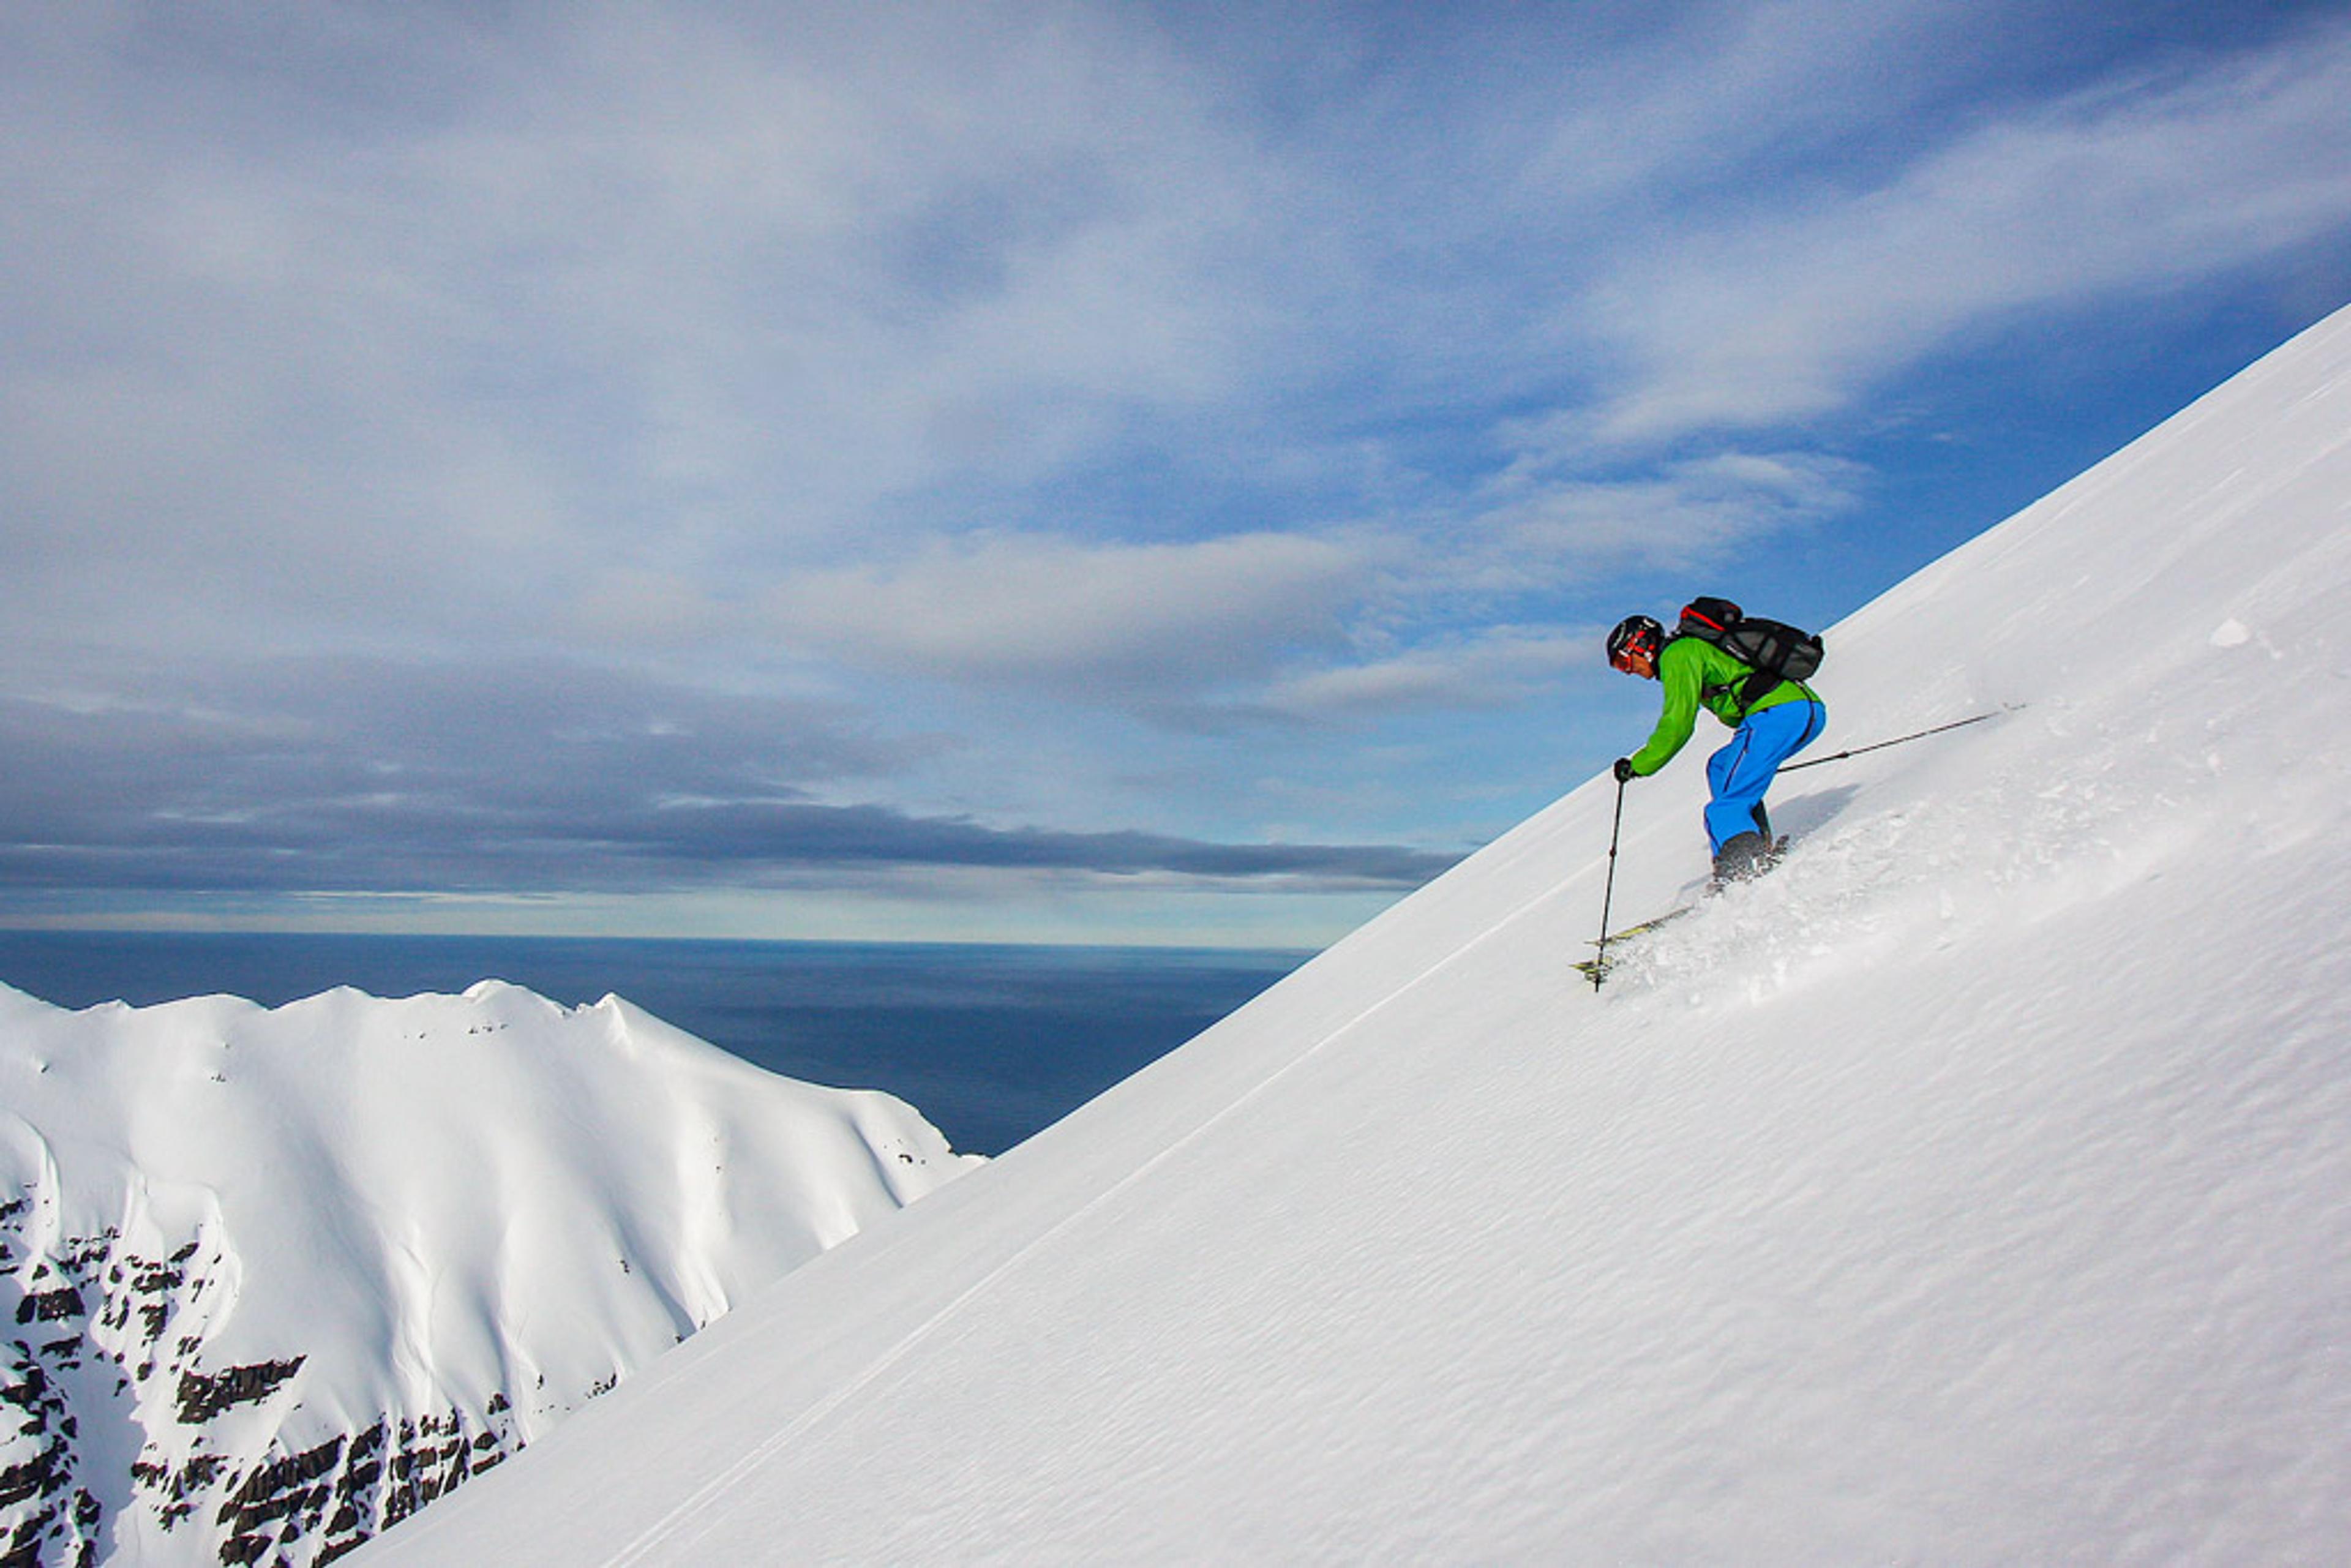 A skier gliding down a steep mountain with the ocean in the background